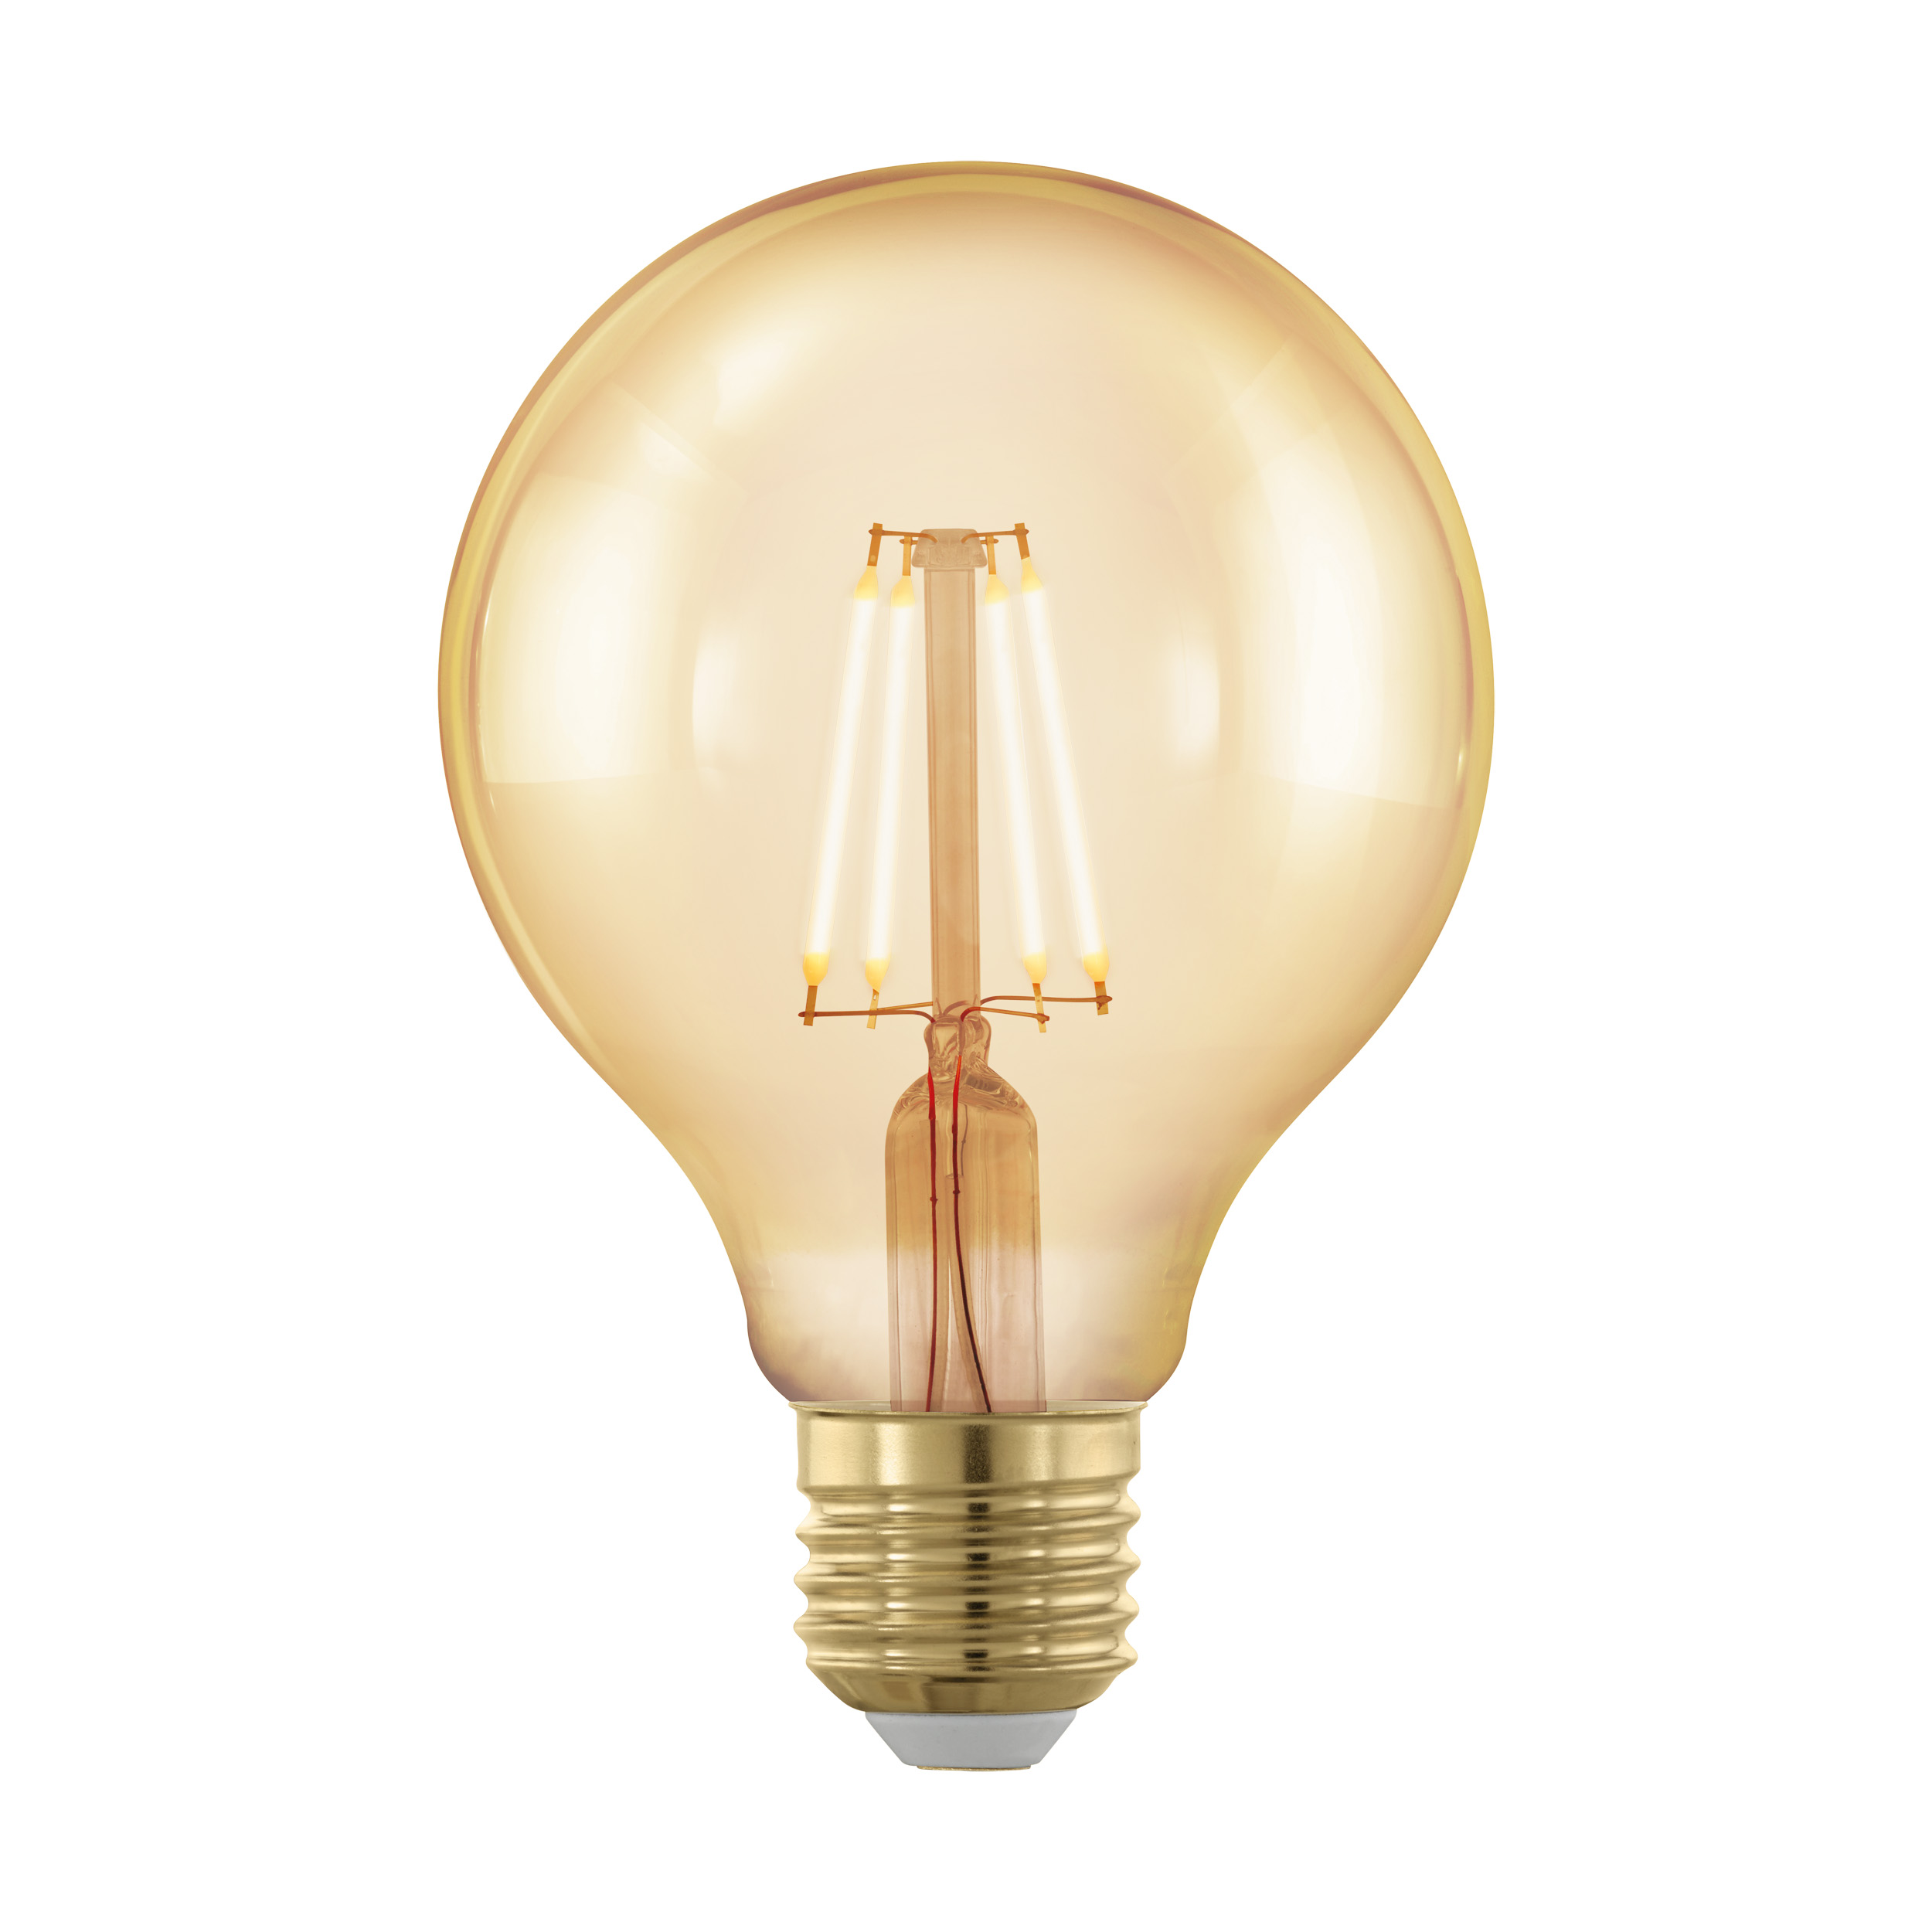 Lampe LED golden age E27 globe 80 320Lm 1700K dimmable